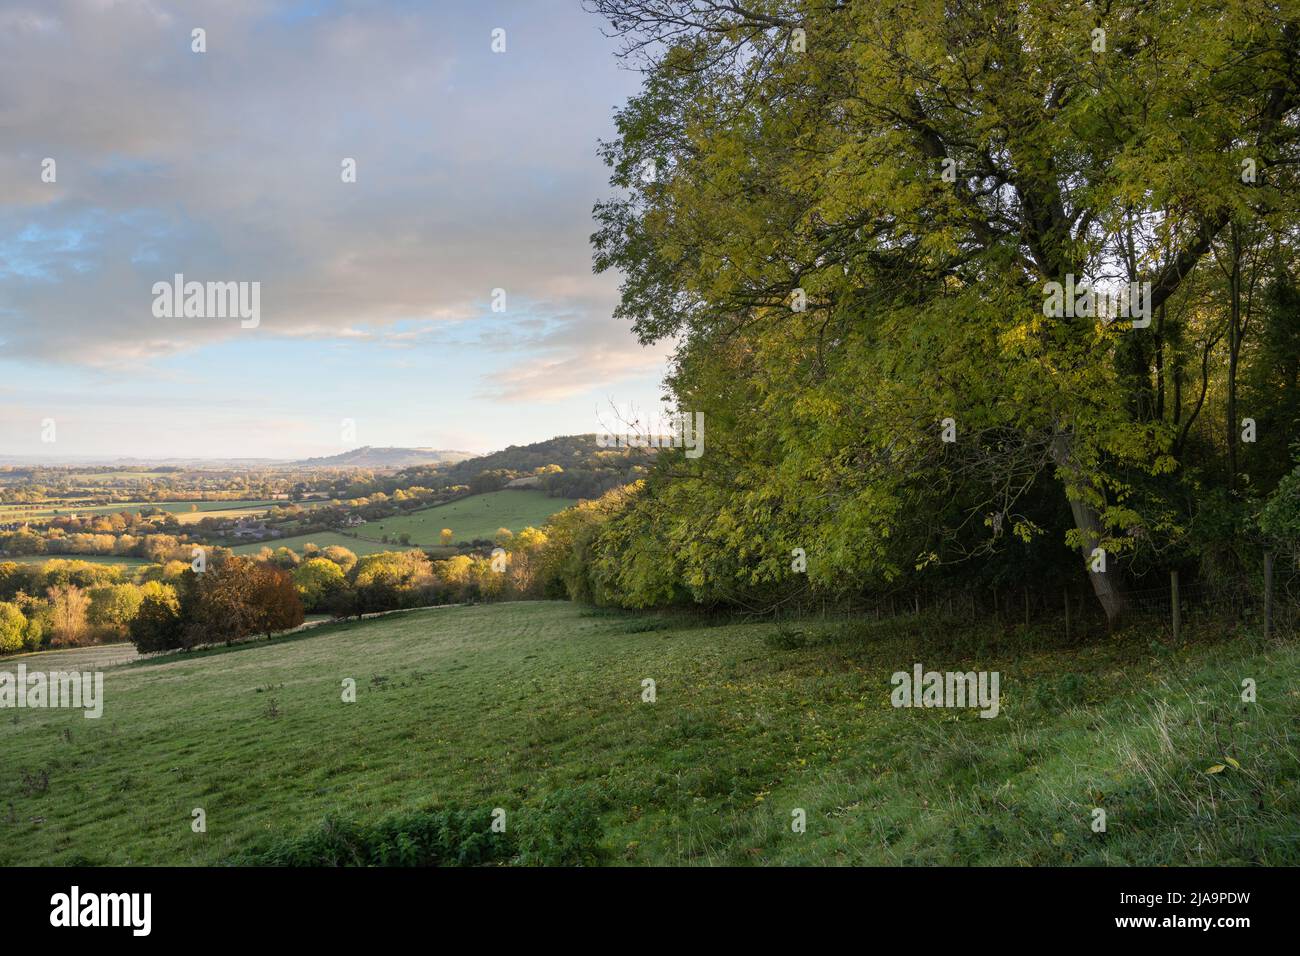 North Cotswold countryside, Gloucestershire, England. Stock Photo